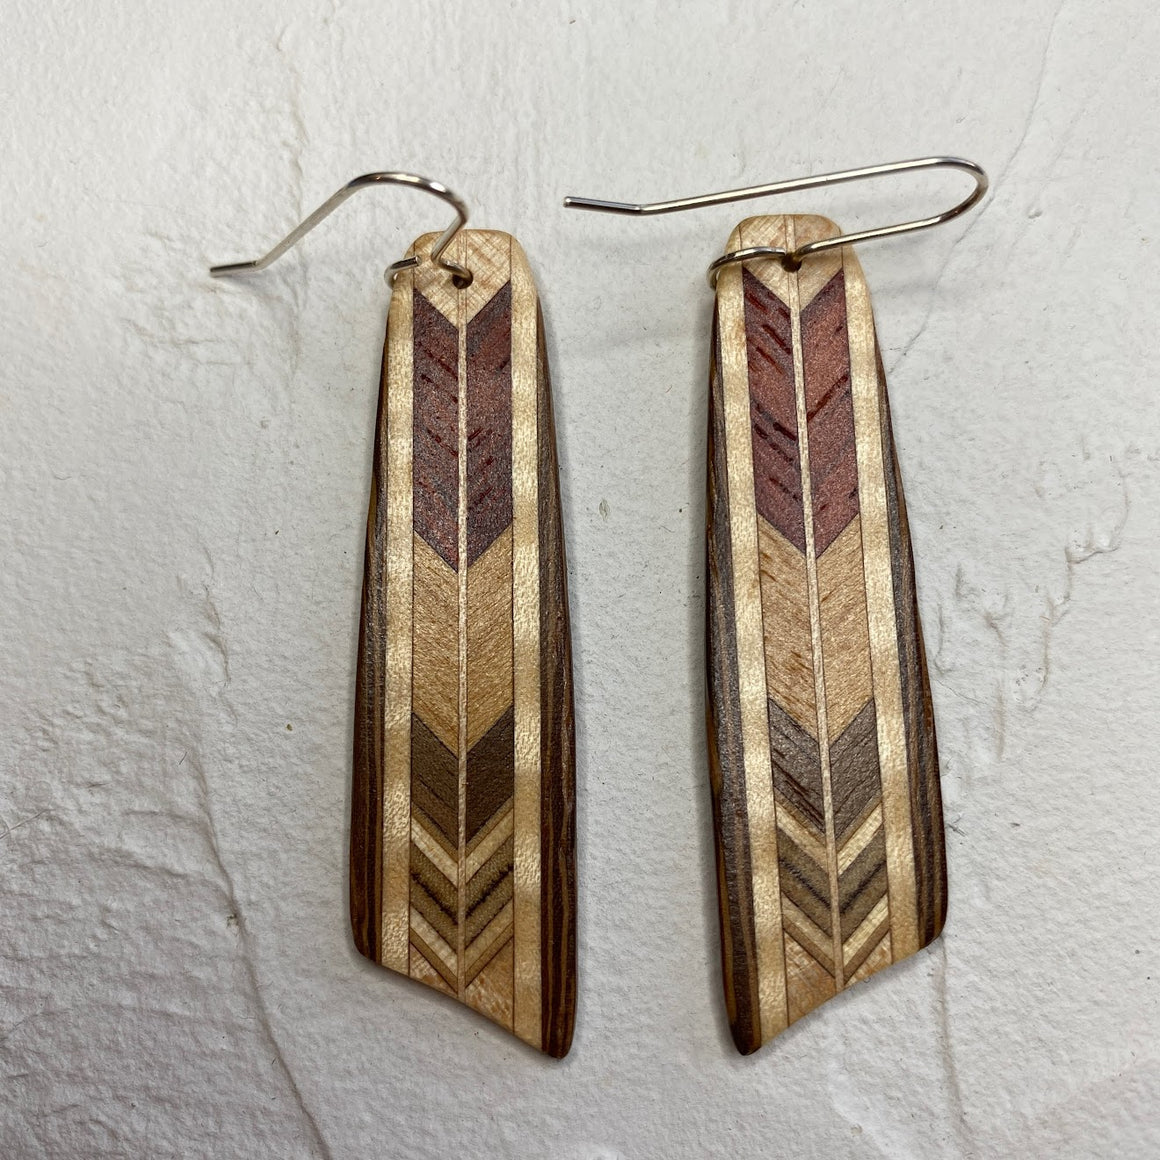 Wooden Images Earrings